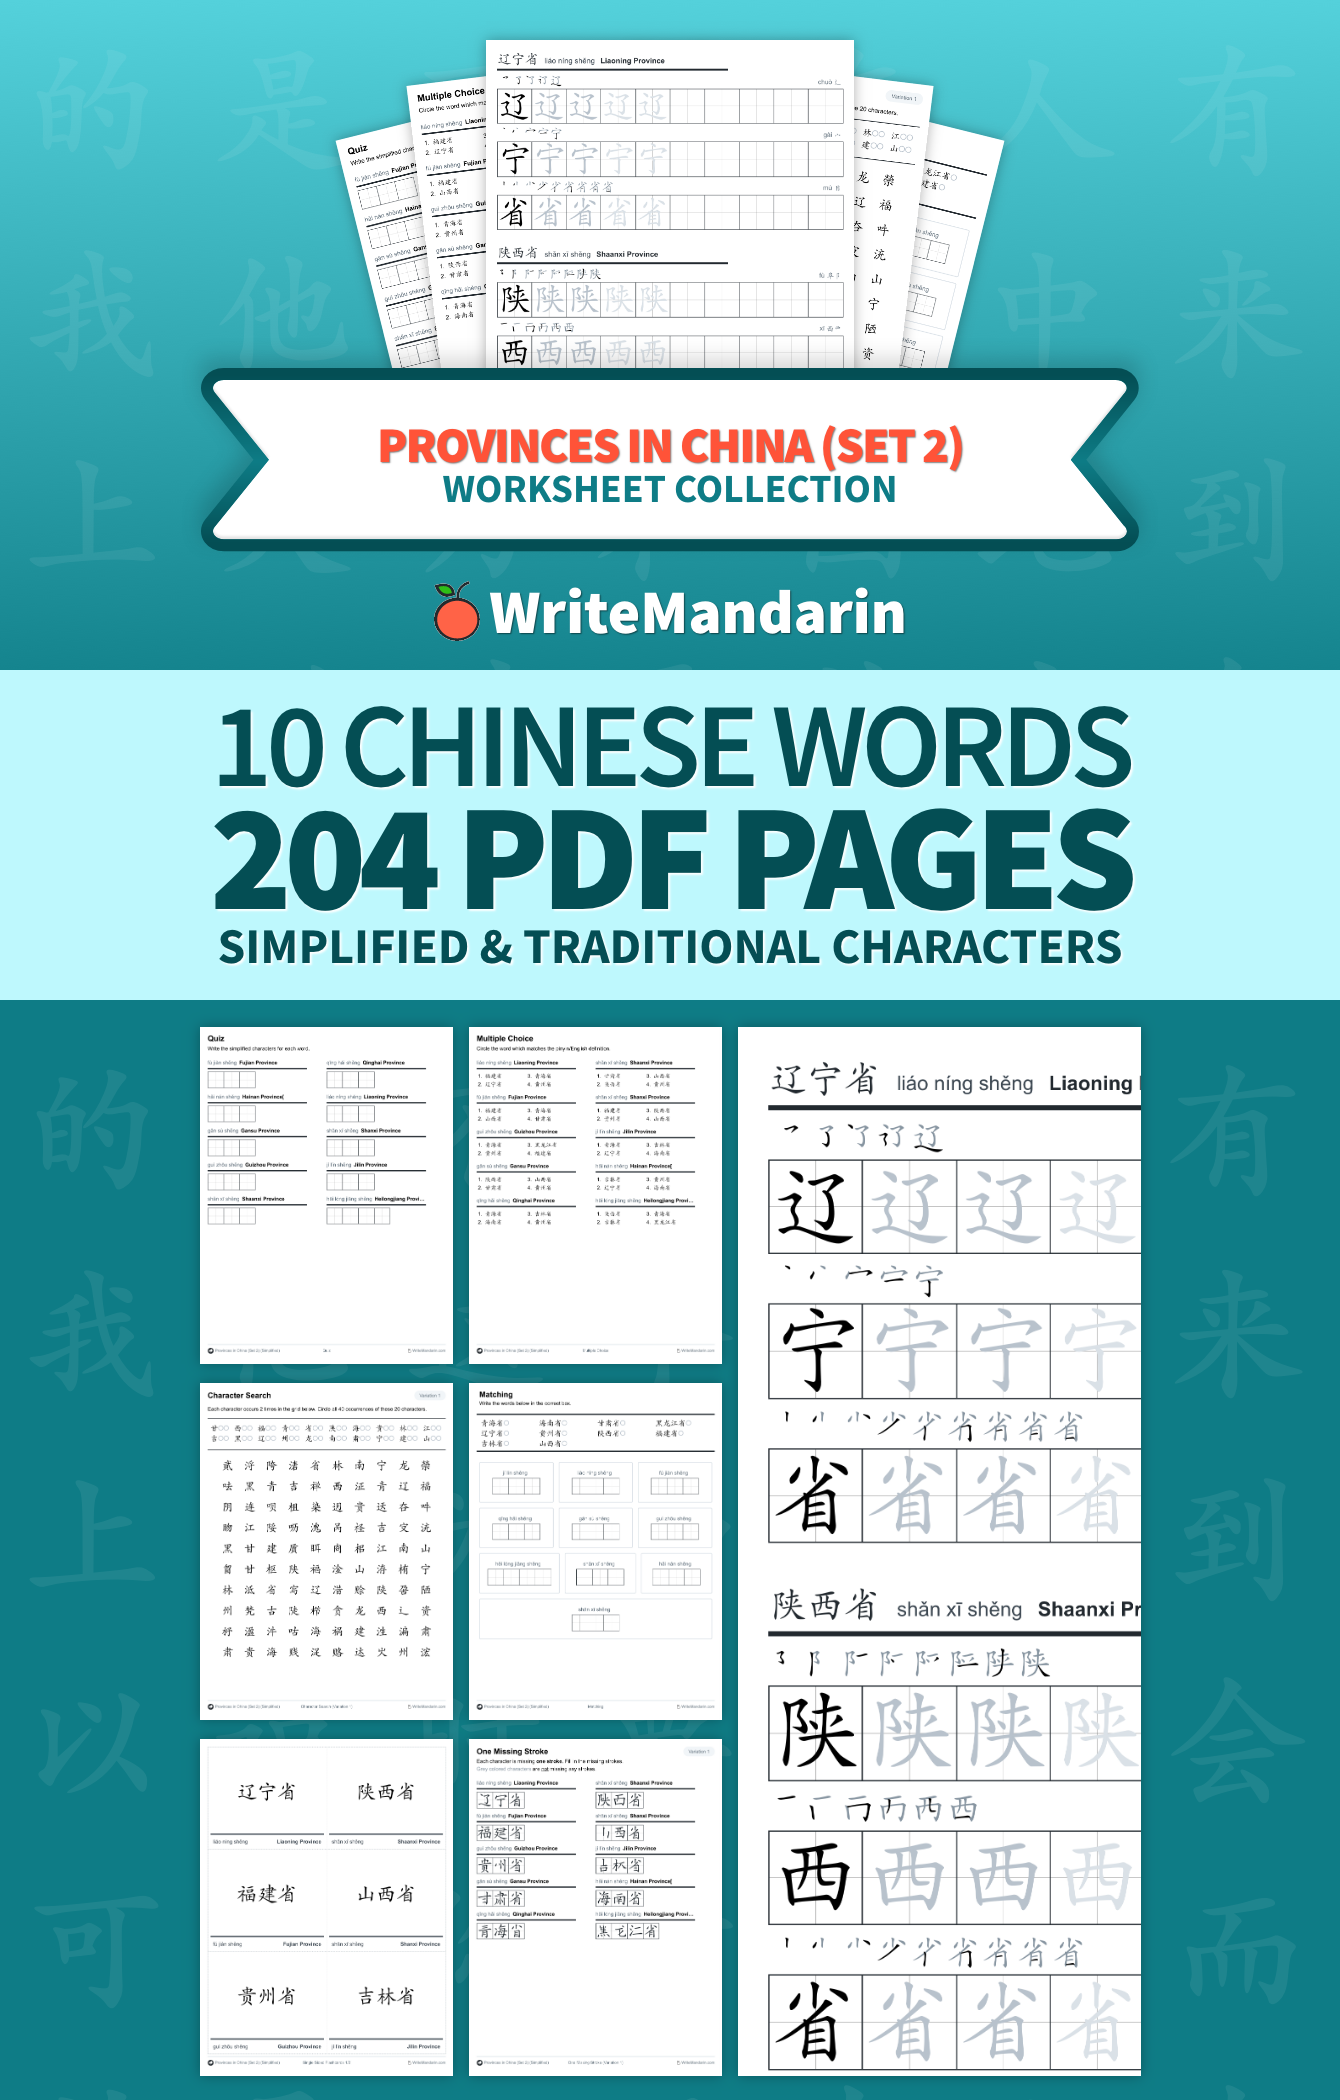 Preview image of Provinces in China (Set 2) worksheet collection